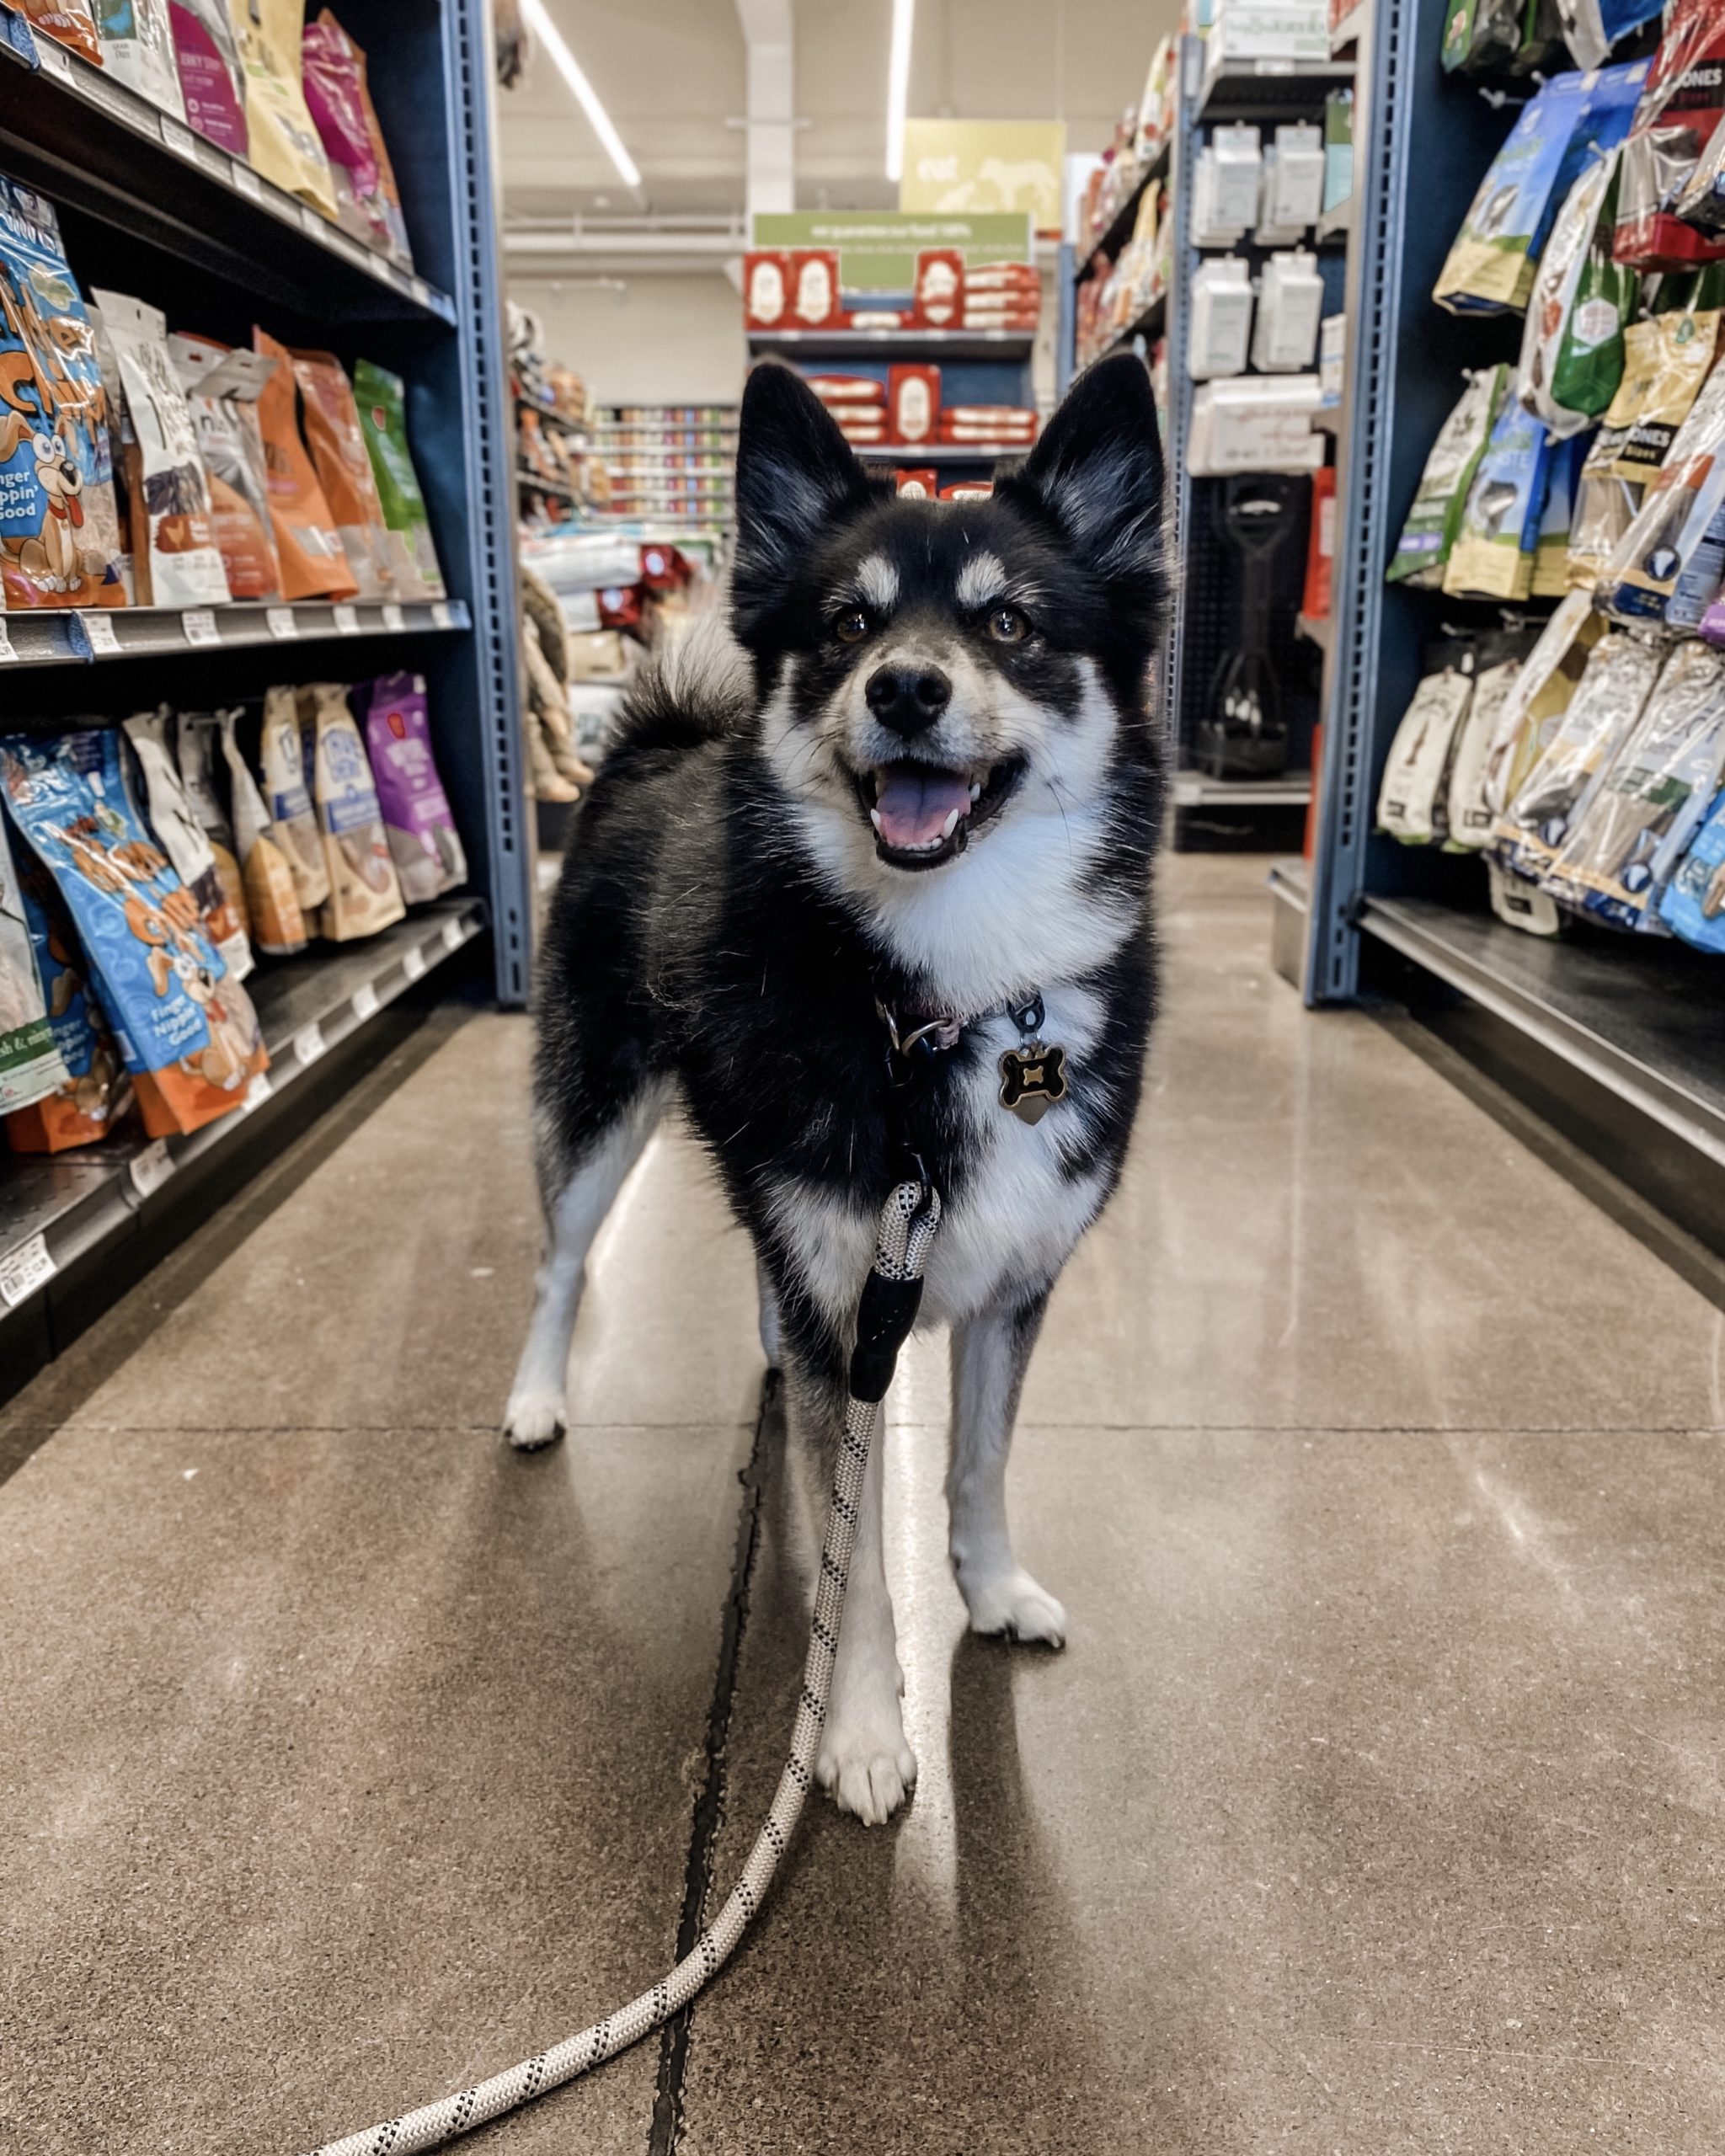 a dog standing in an aisle at a store